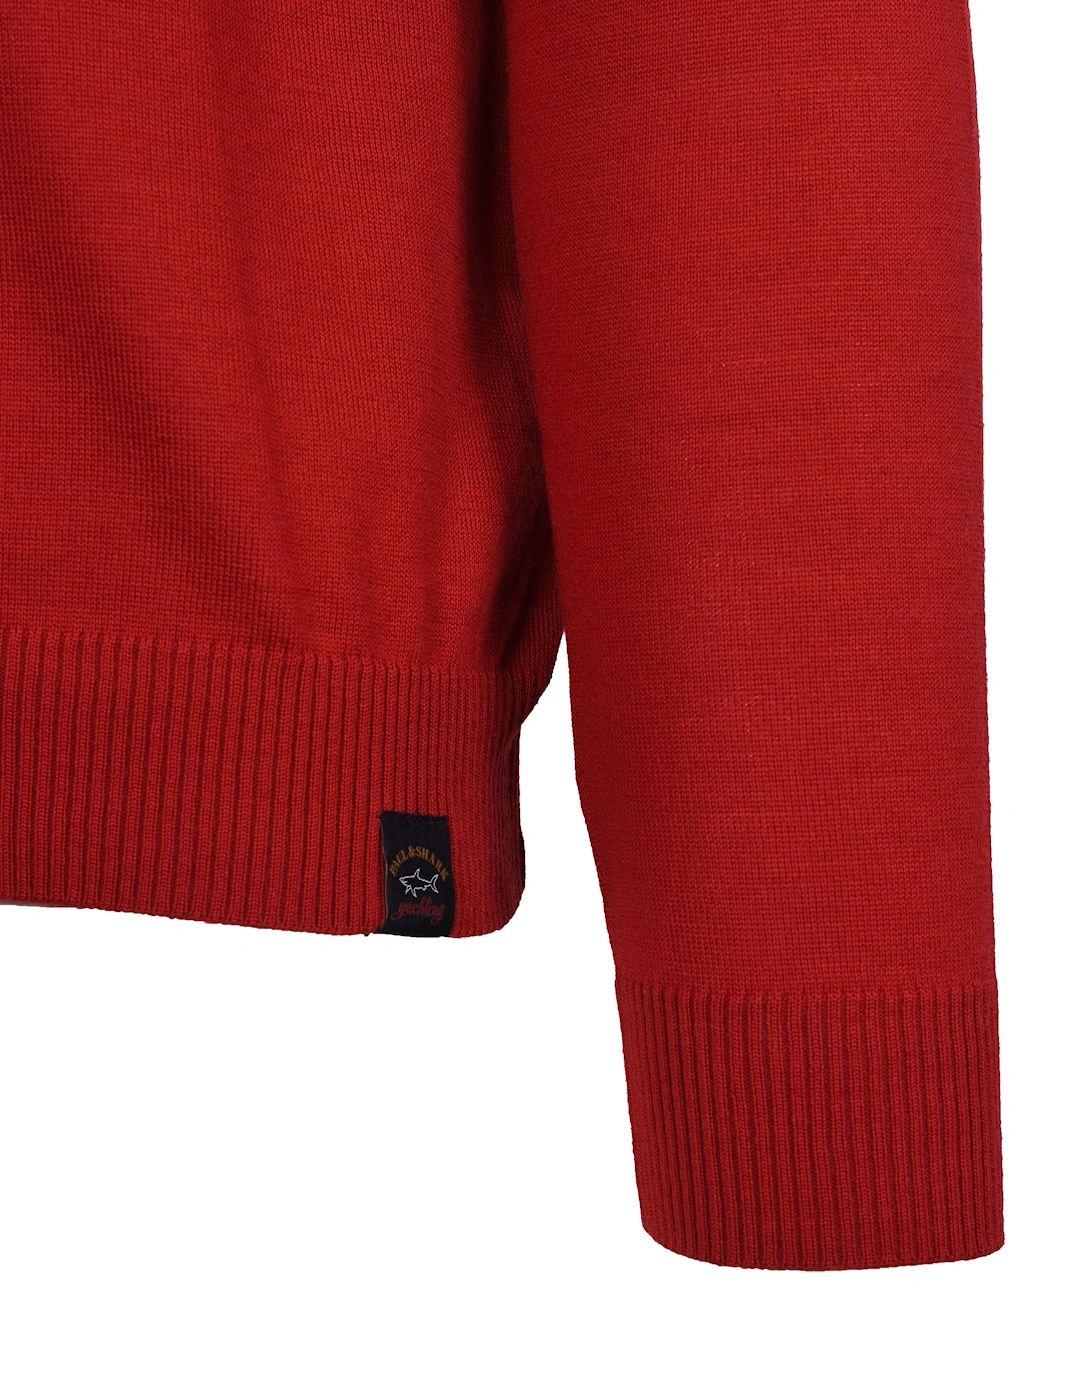 Paul And Shark Crew Neck Knitwear Red